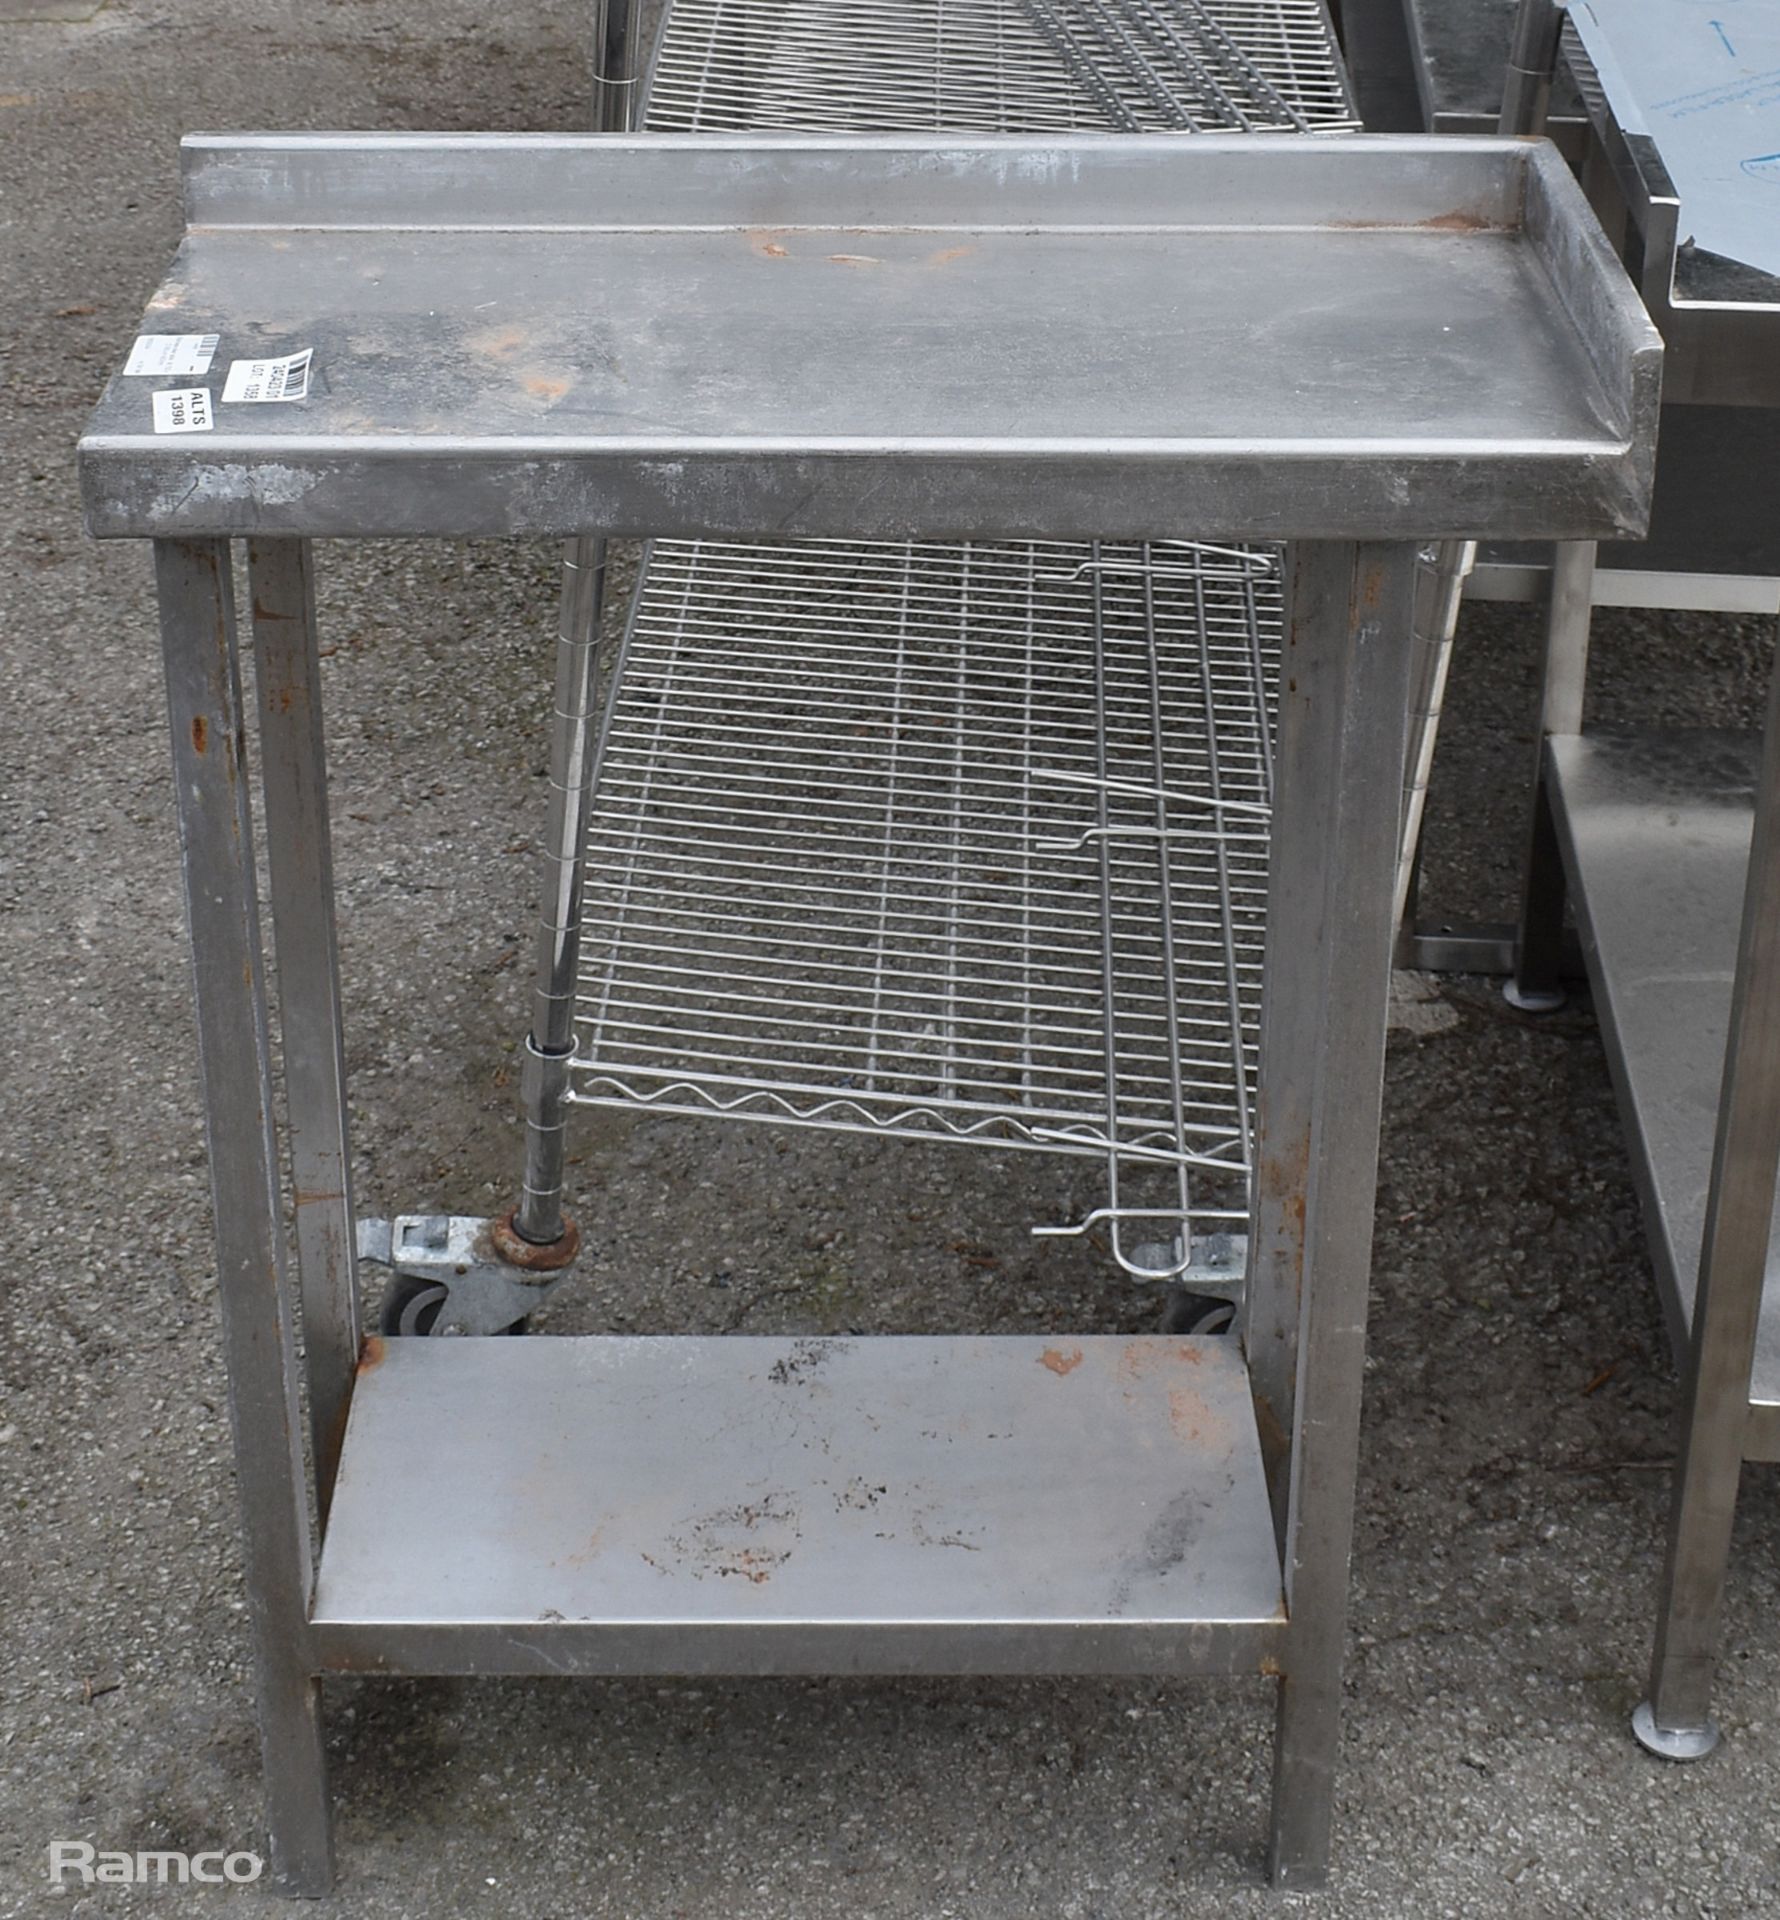 Stainless steel table - W 700 x D 300 x H 900mm - Image 2 of 2